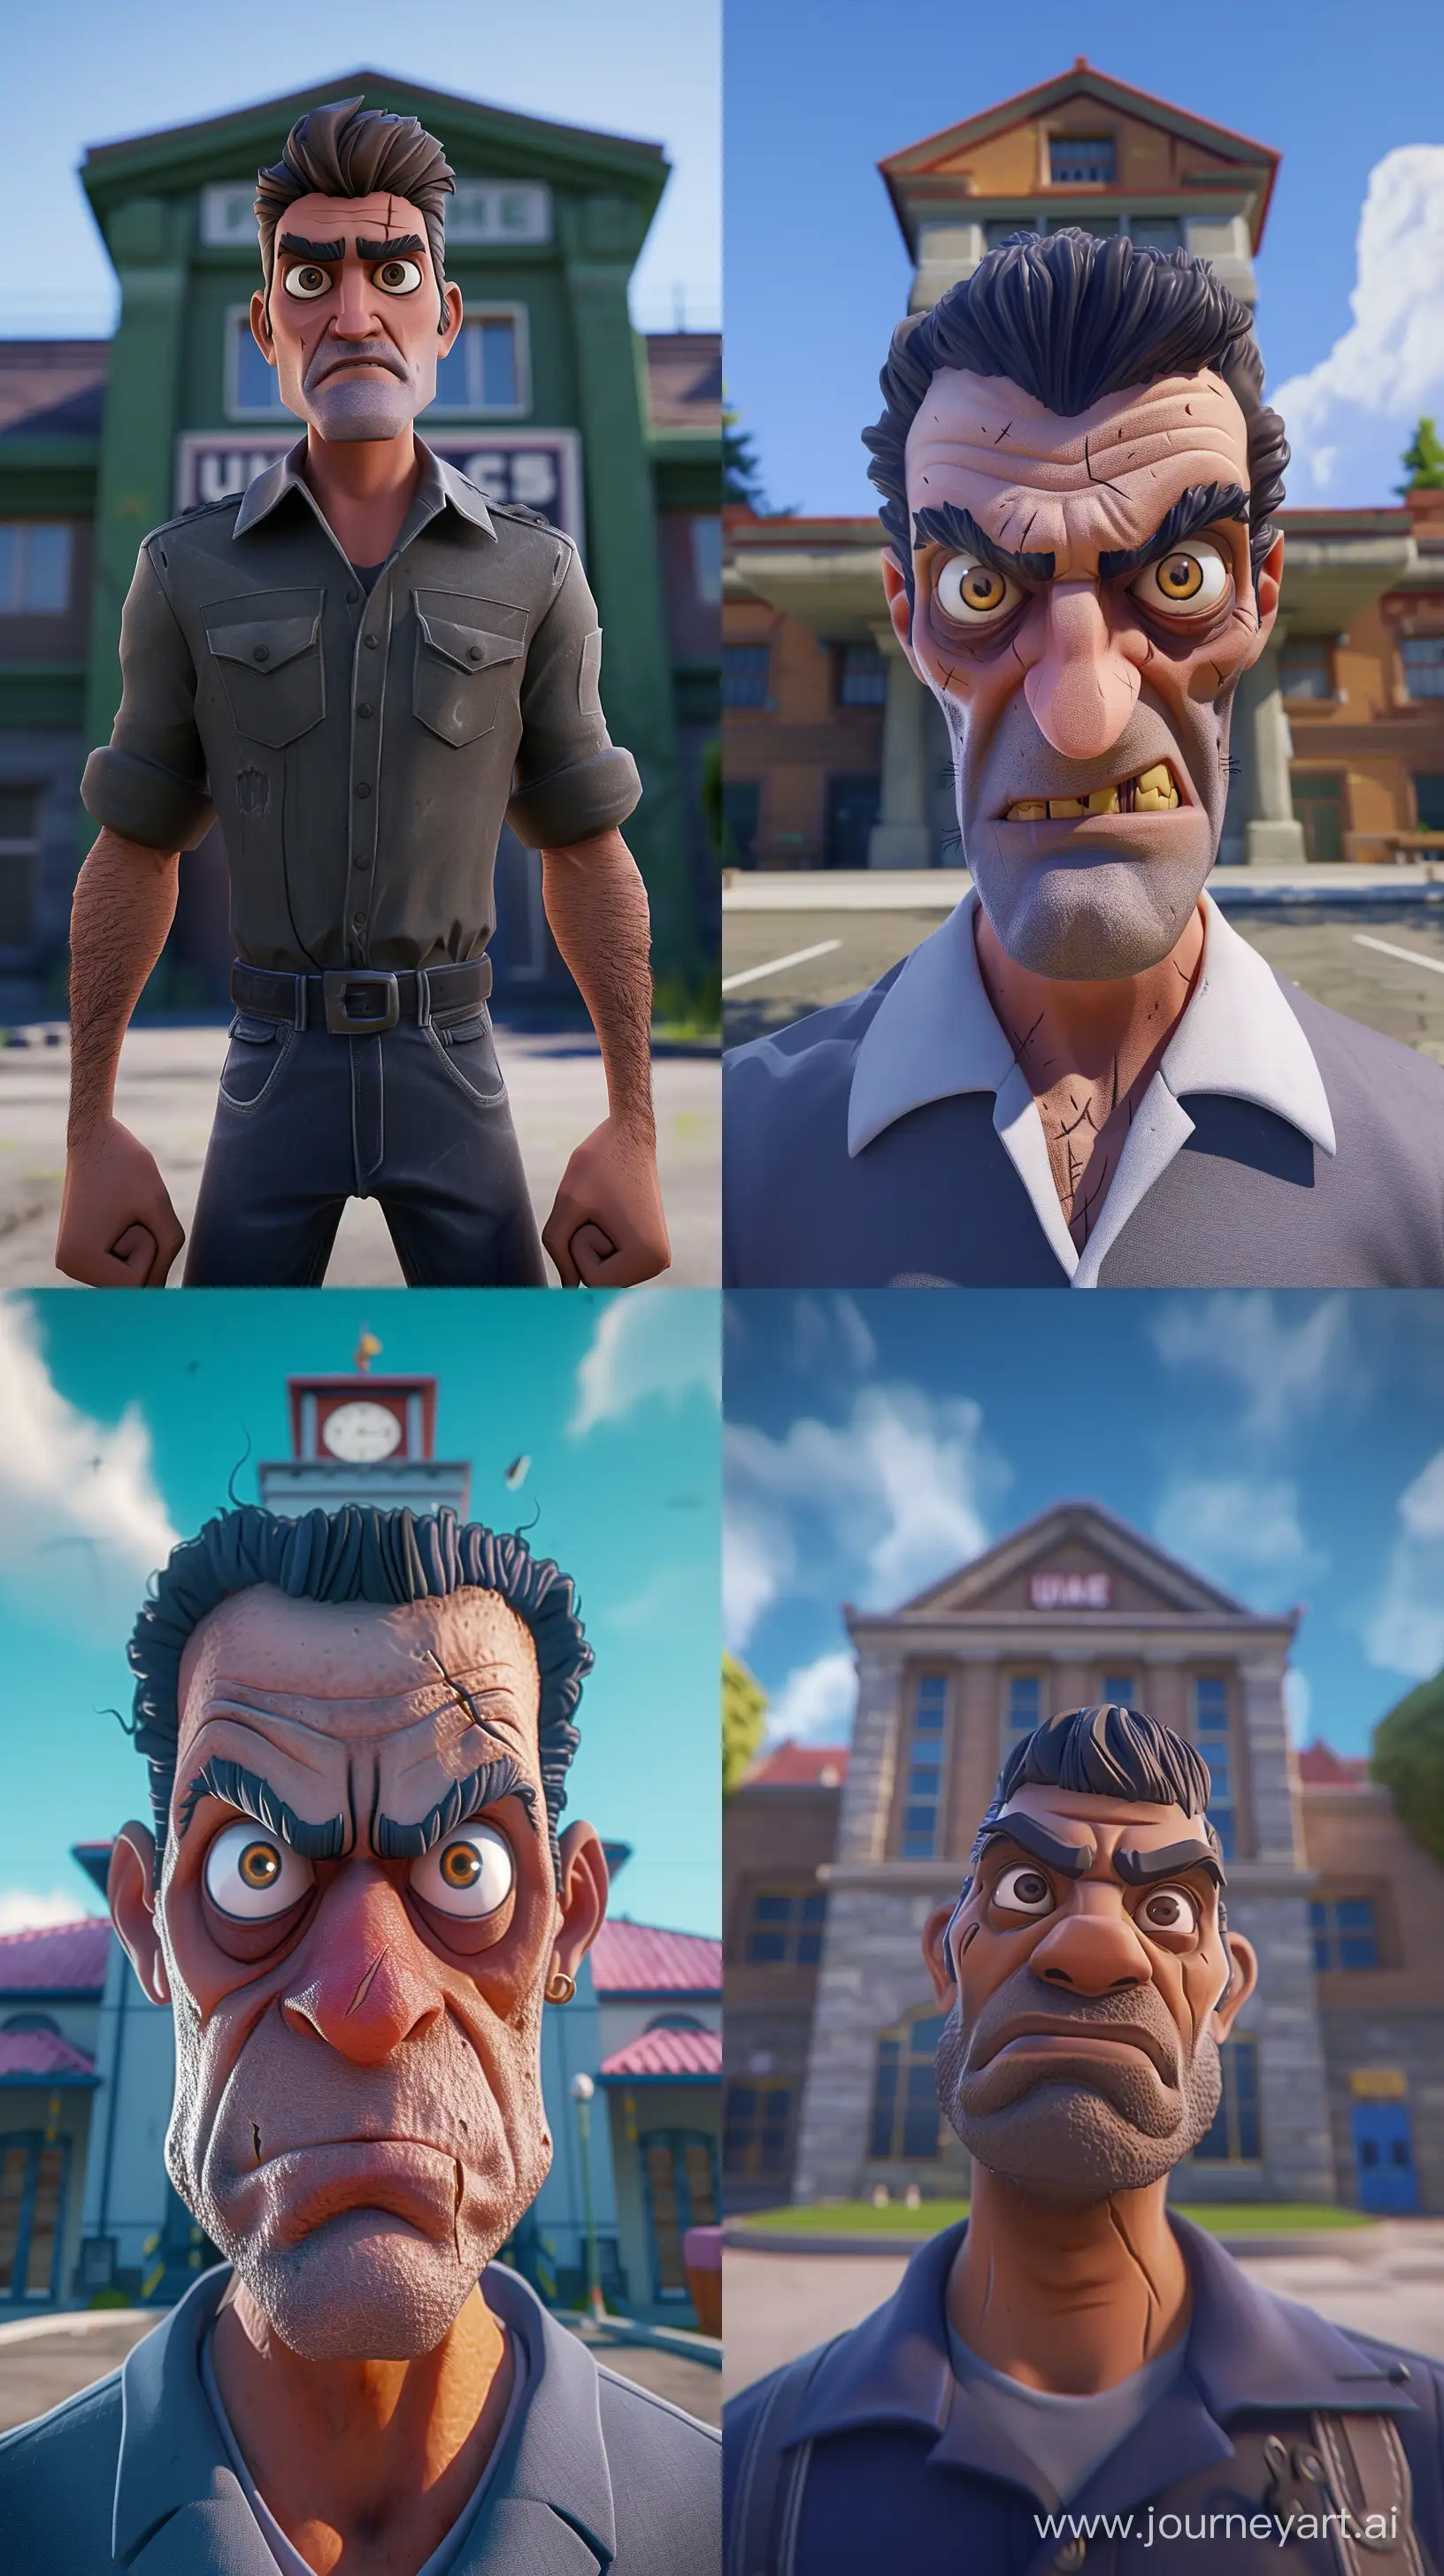 Intense-Fortnite-Style-Character-Portrait-at-Mental-Hospital